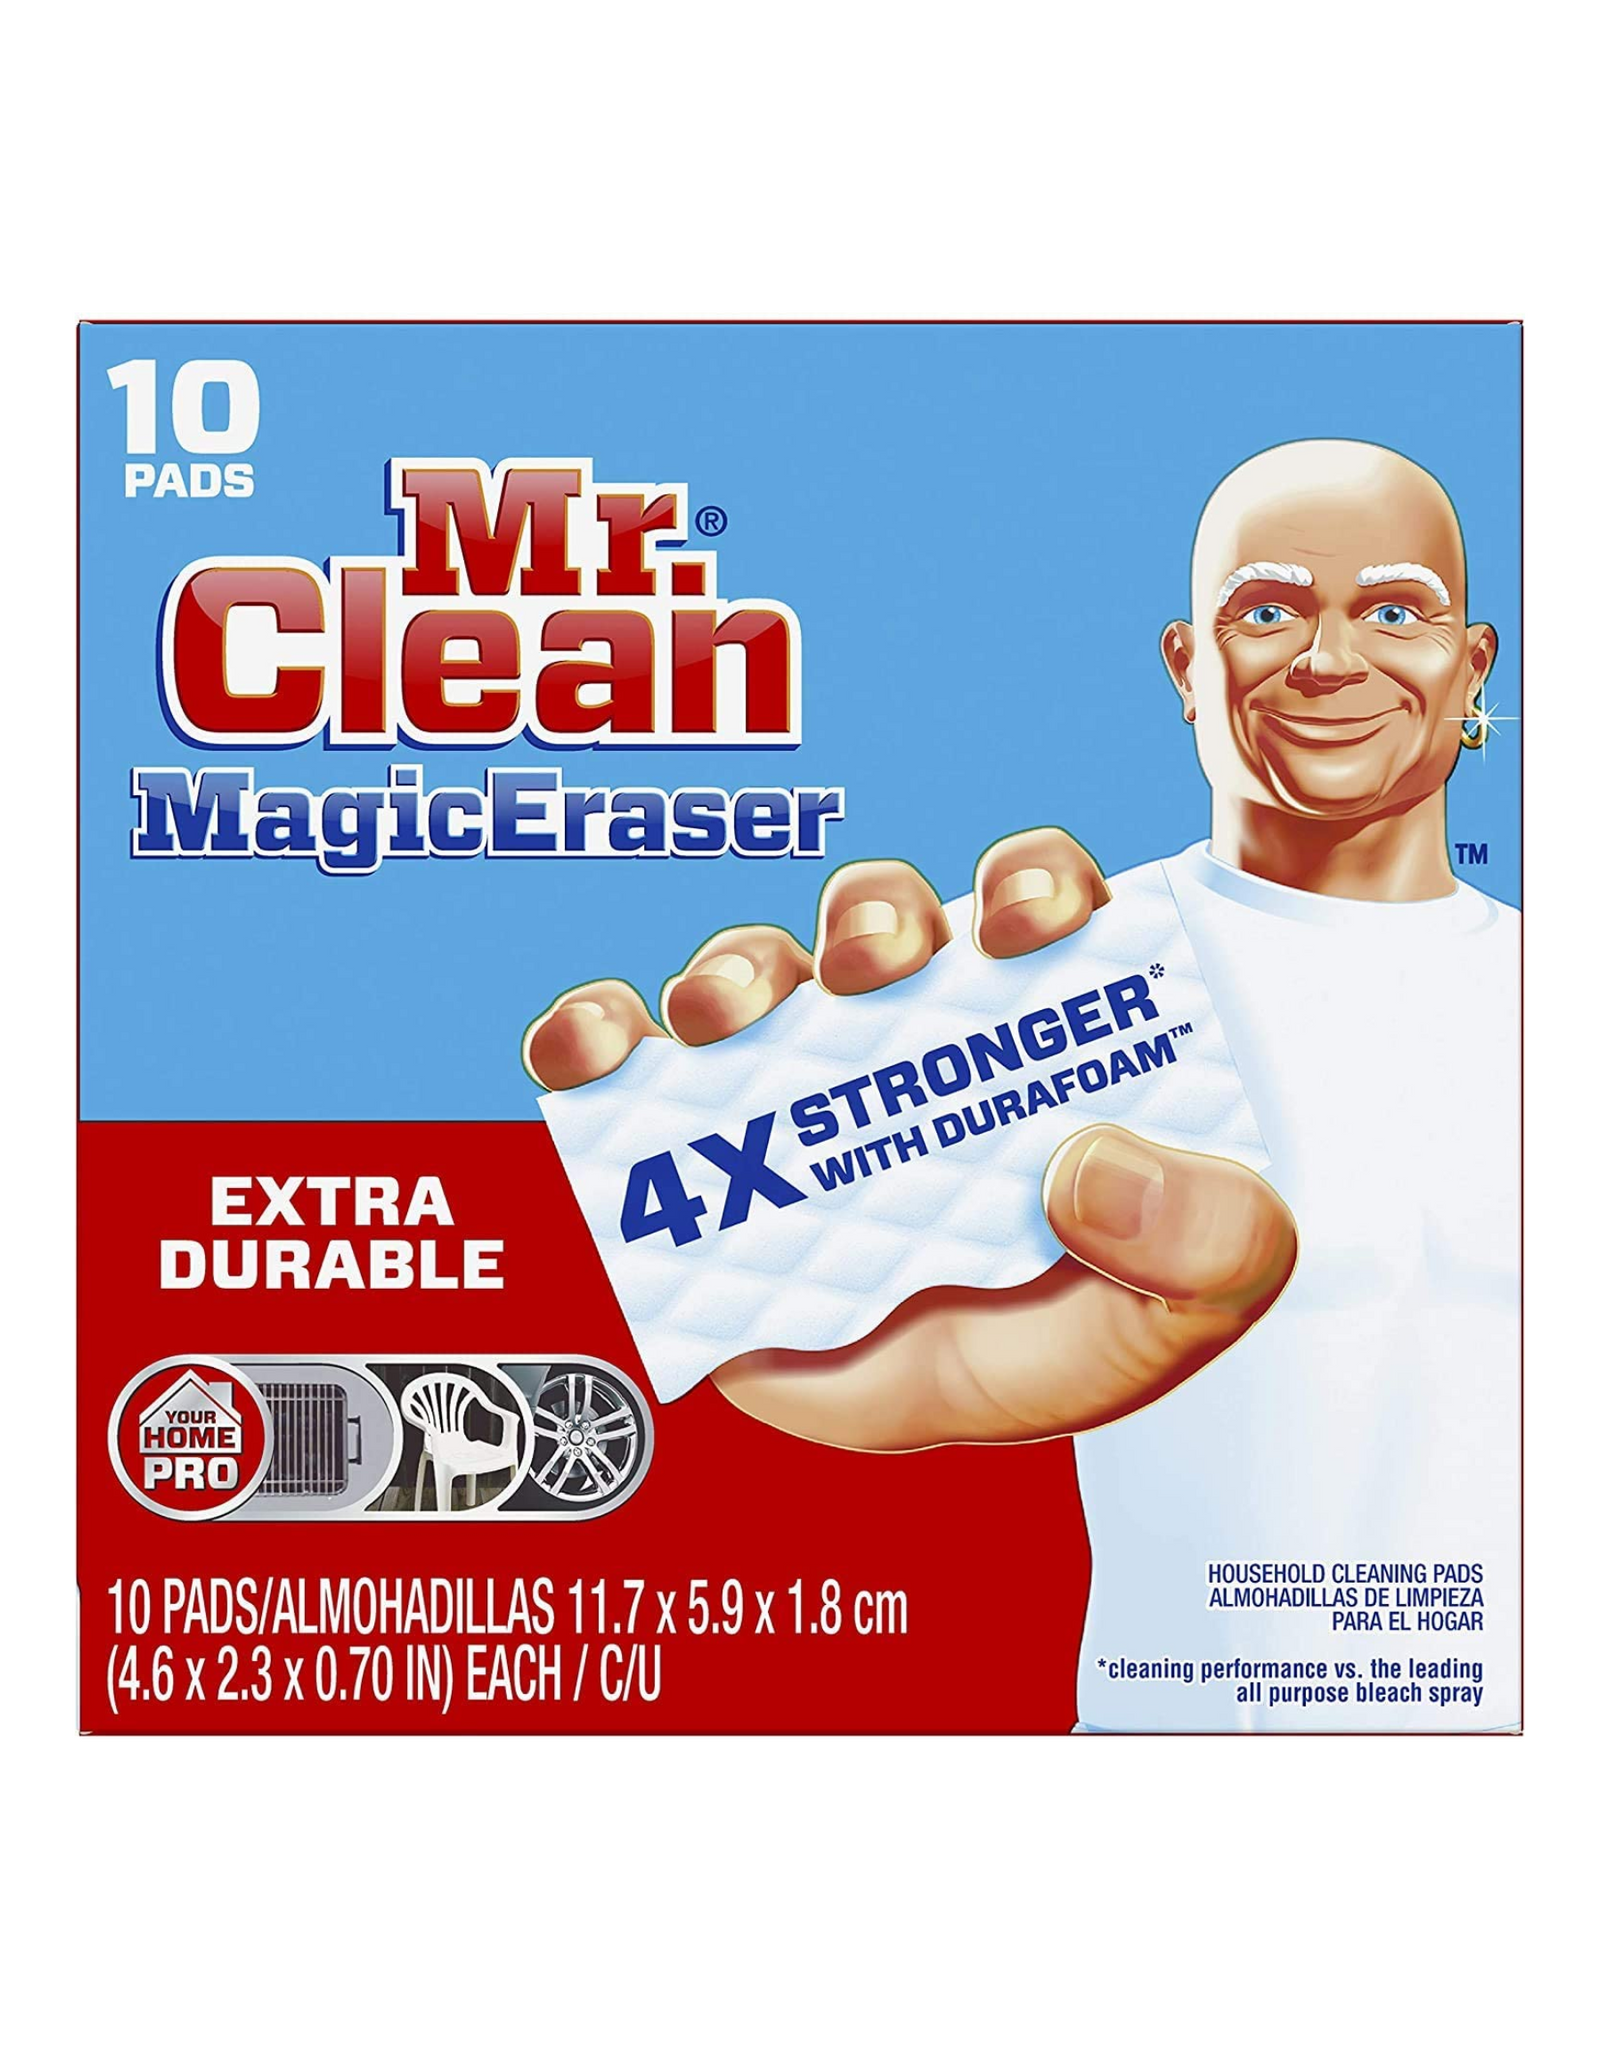 Mr. Clean Magic Eraser, Extra Durable, 4x Stronger with Durafoam, 10 Ct